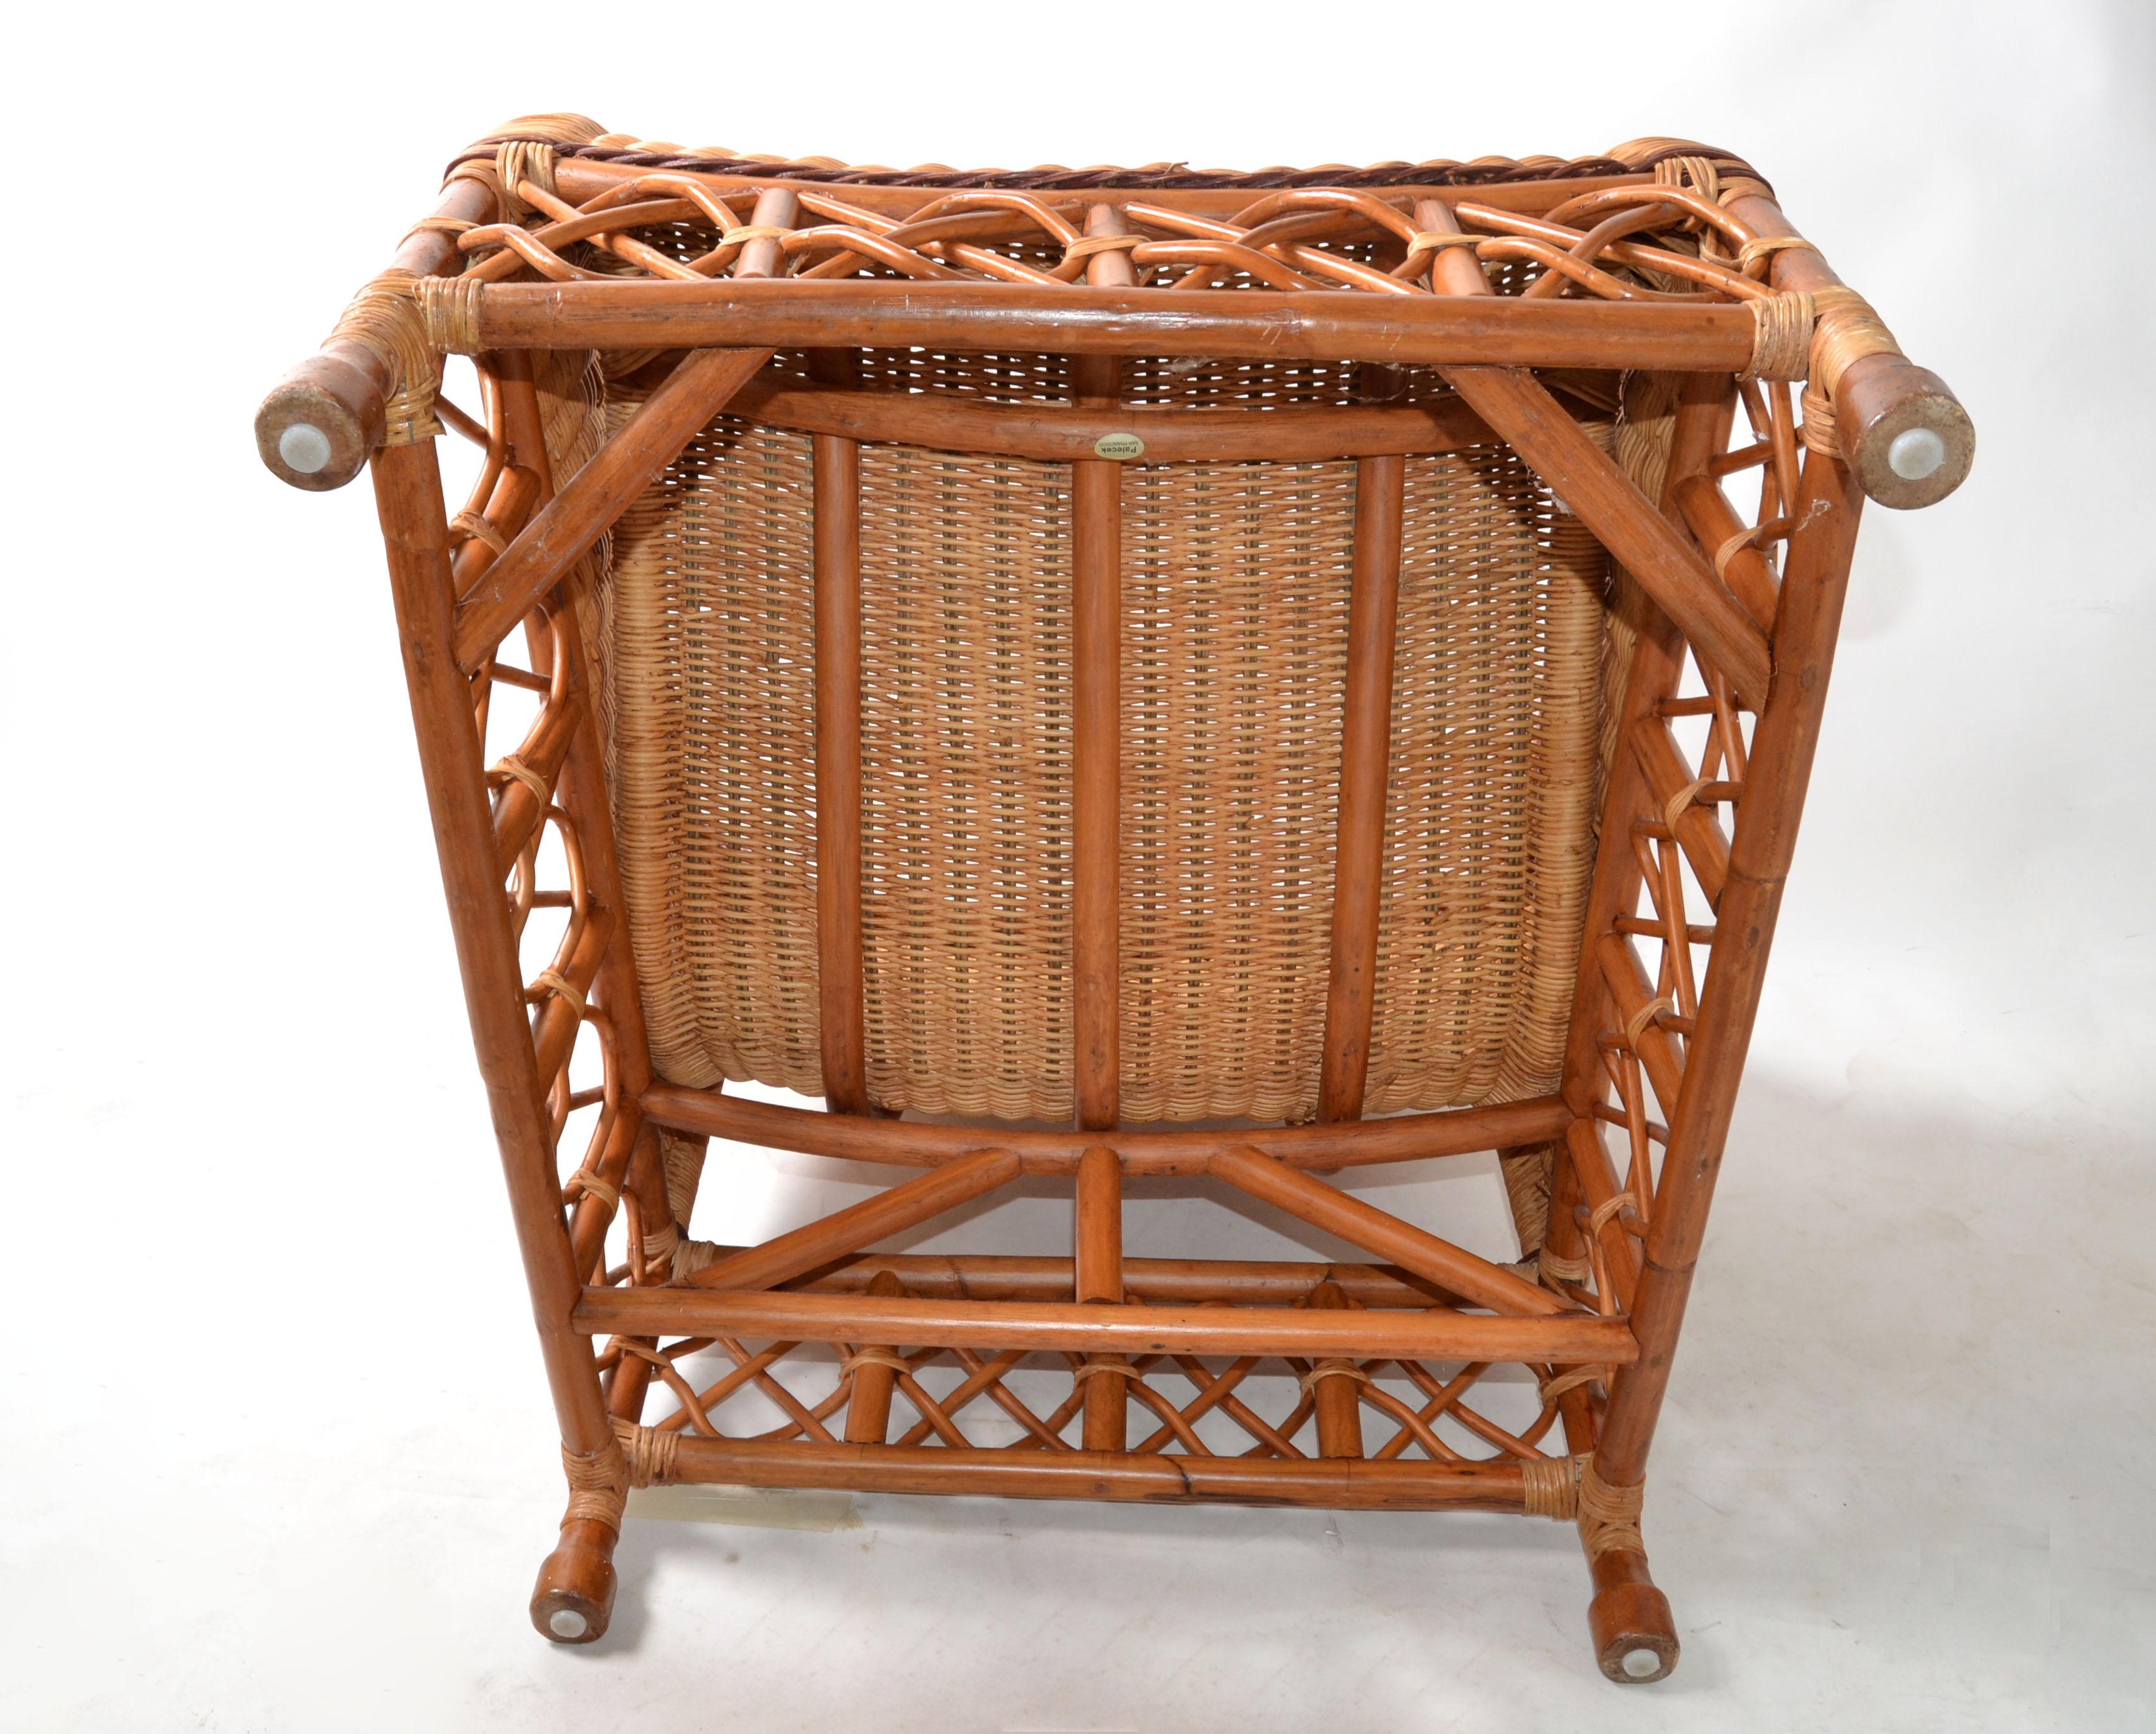 Bamboo, Cane & Wicker Lounge Chair Handwoven Bohemian 1960 Mid-Century Modern For Sale 7